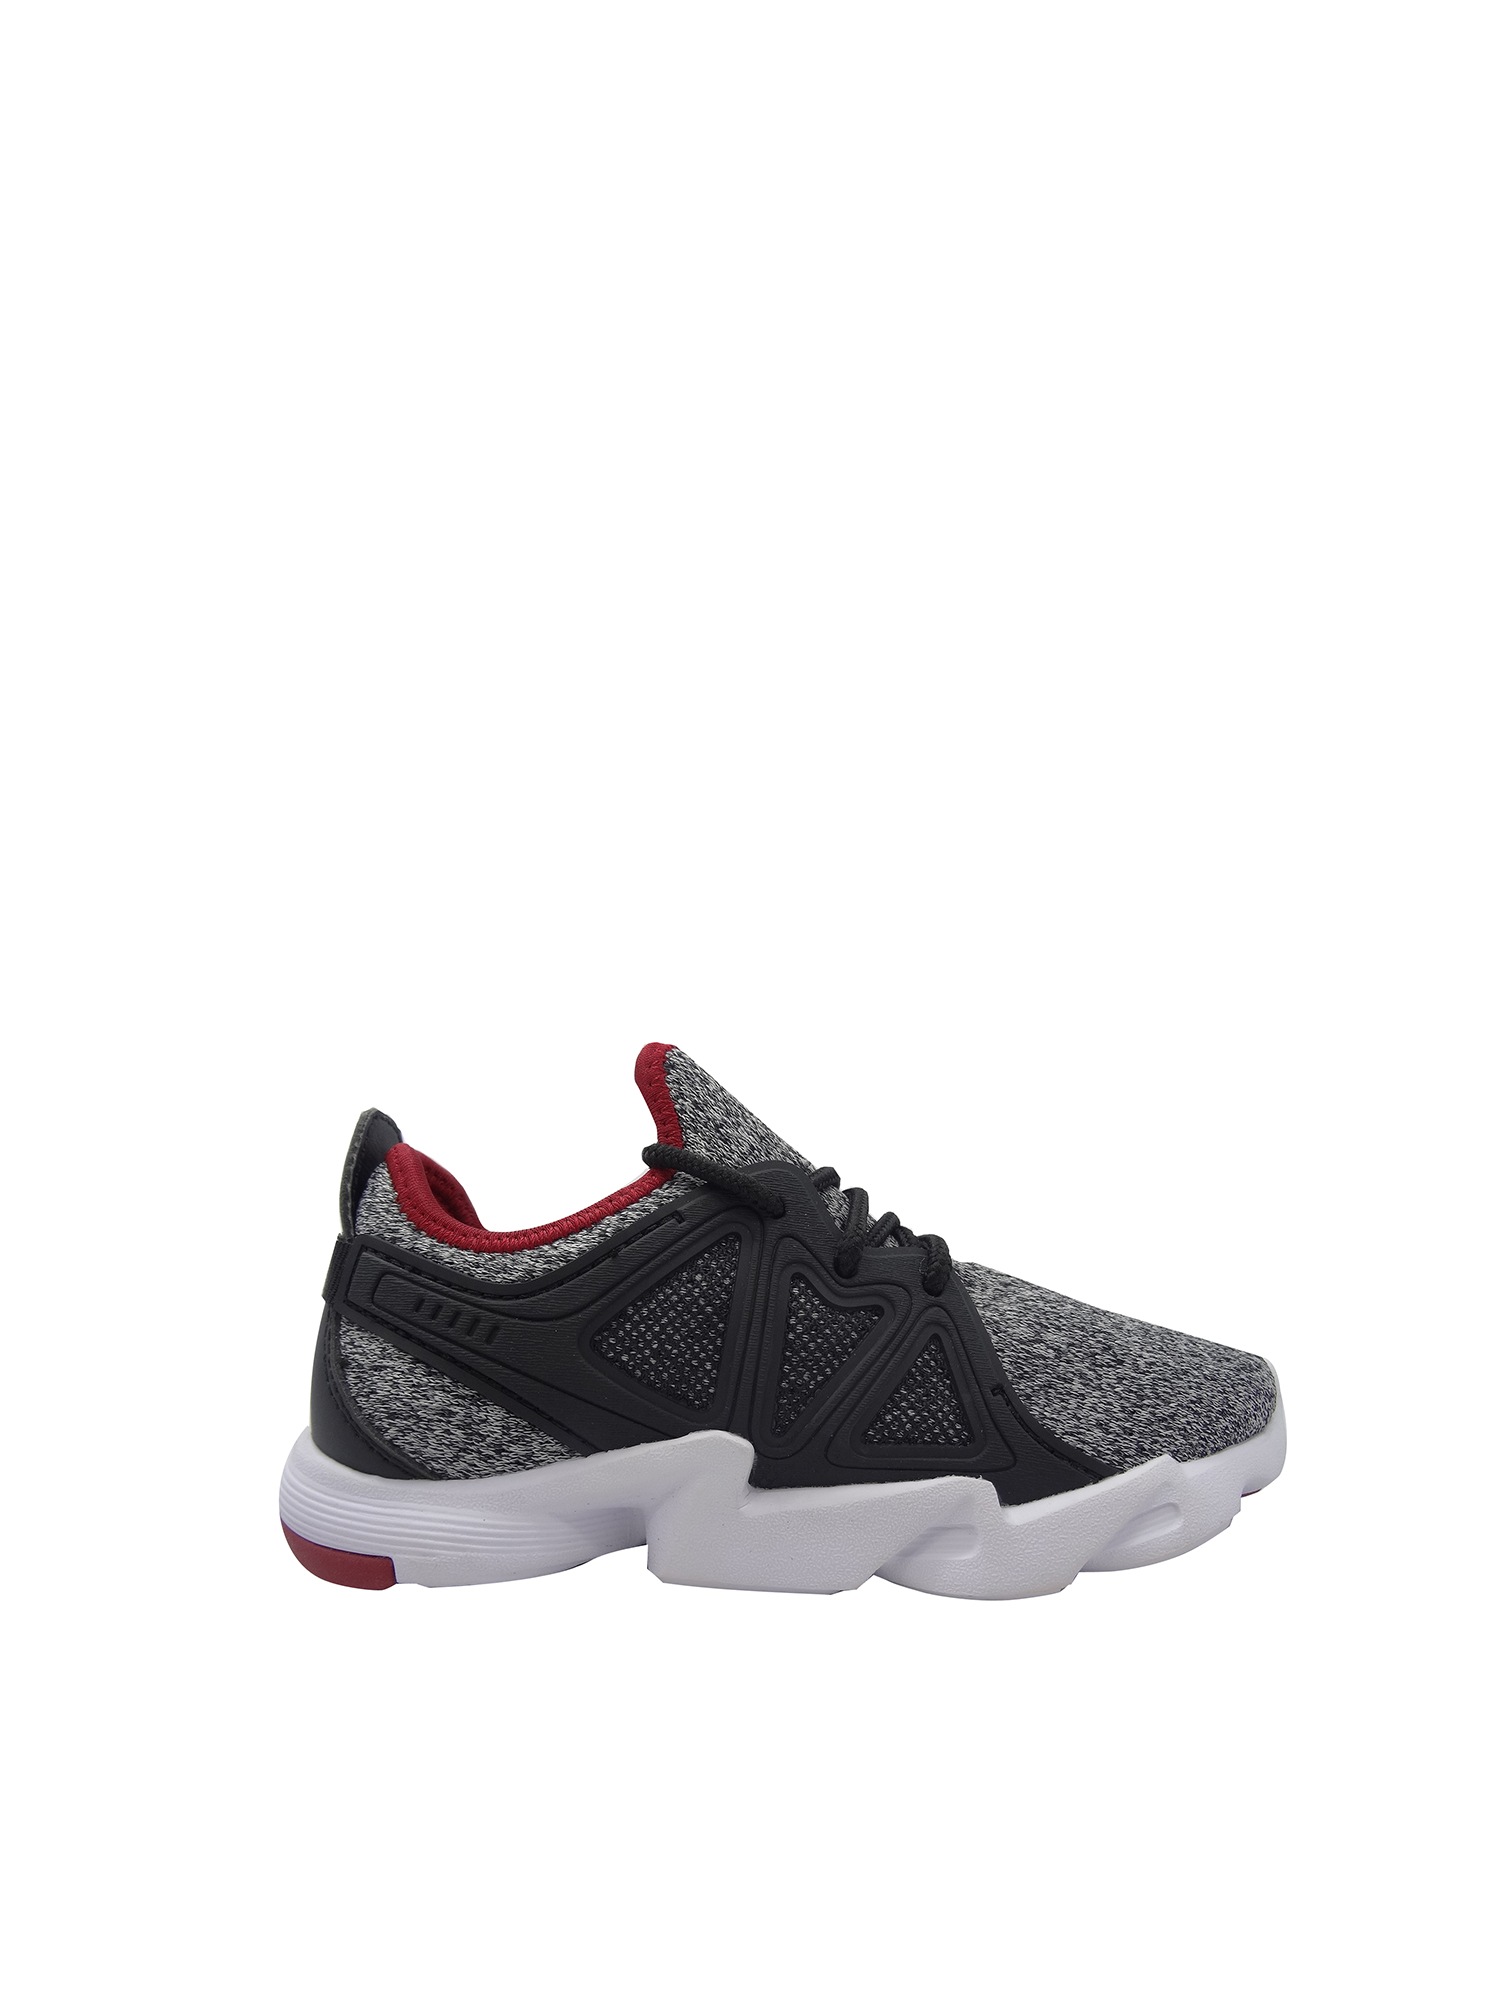 Boy's Lightweight Knit Athletic Shoe - image 5 of 5